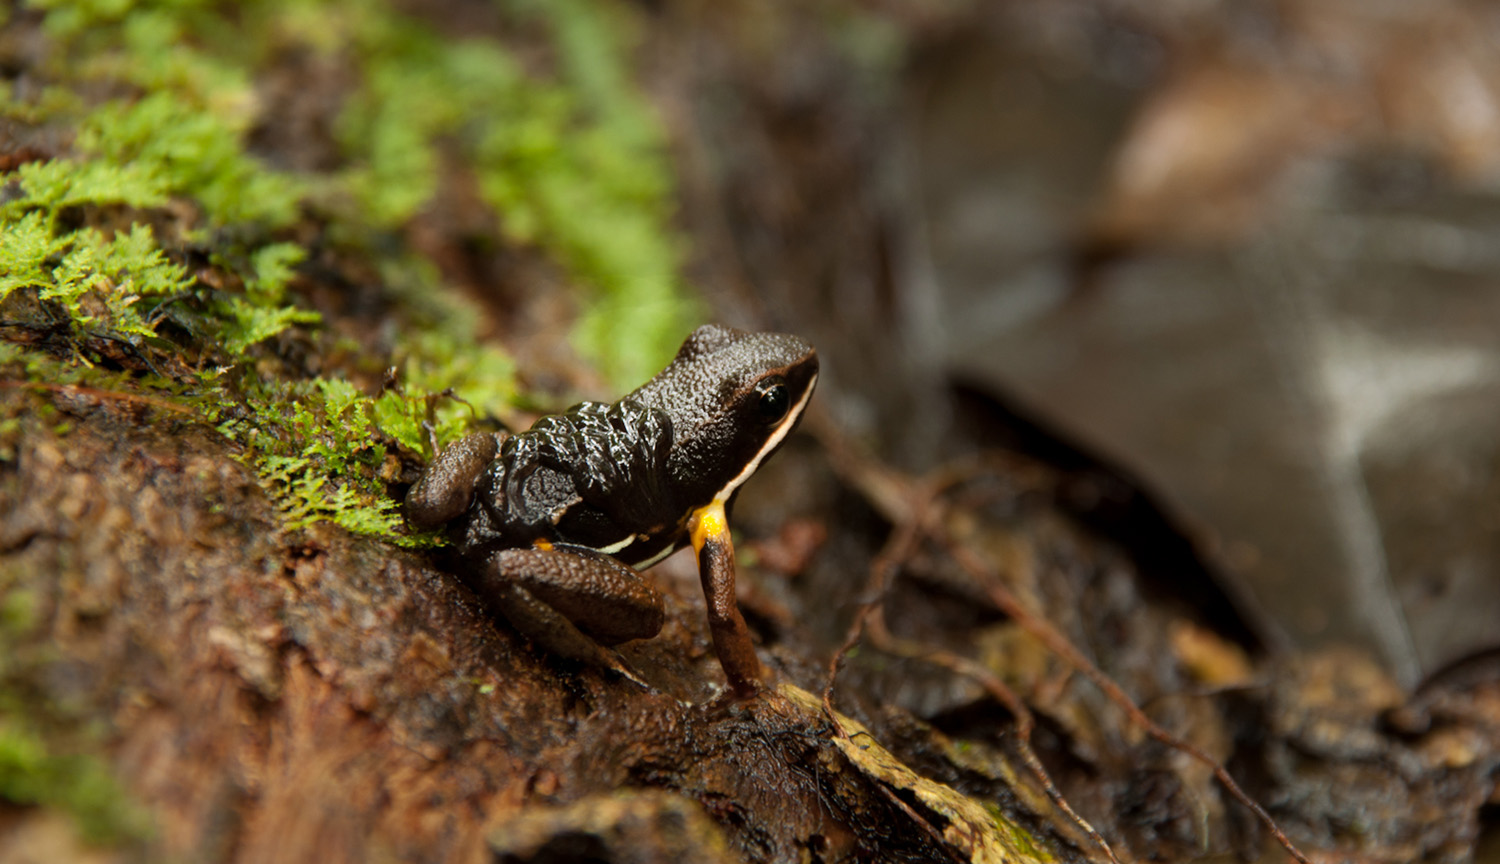 Photograph of a frog perched on what looks like brown soil near some green vegetation. Its back appears bumpy. Those are the tadpoles.